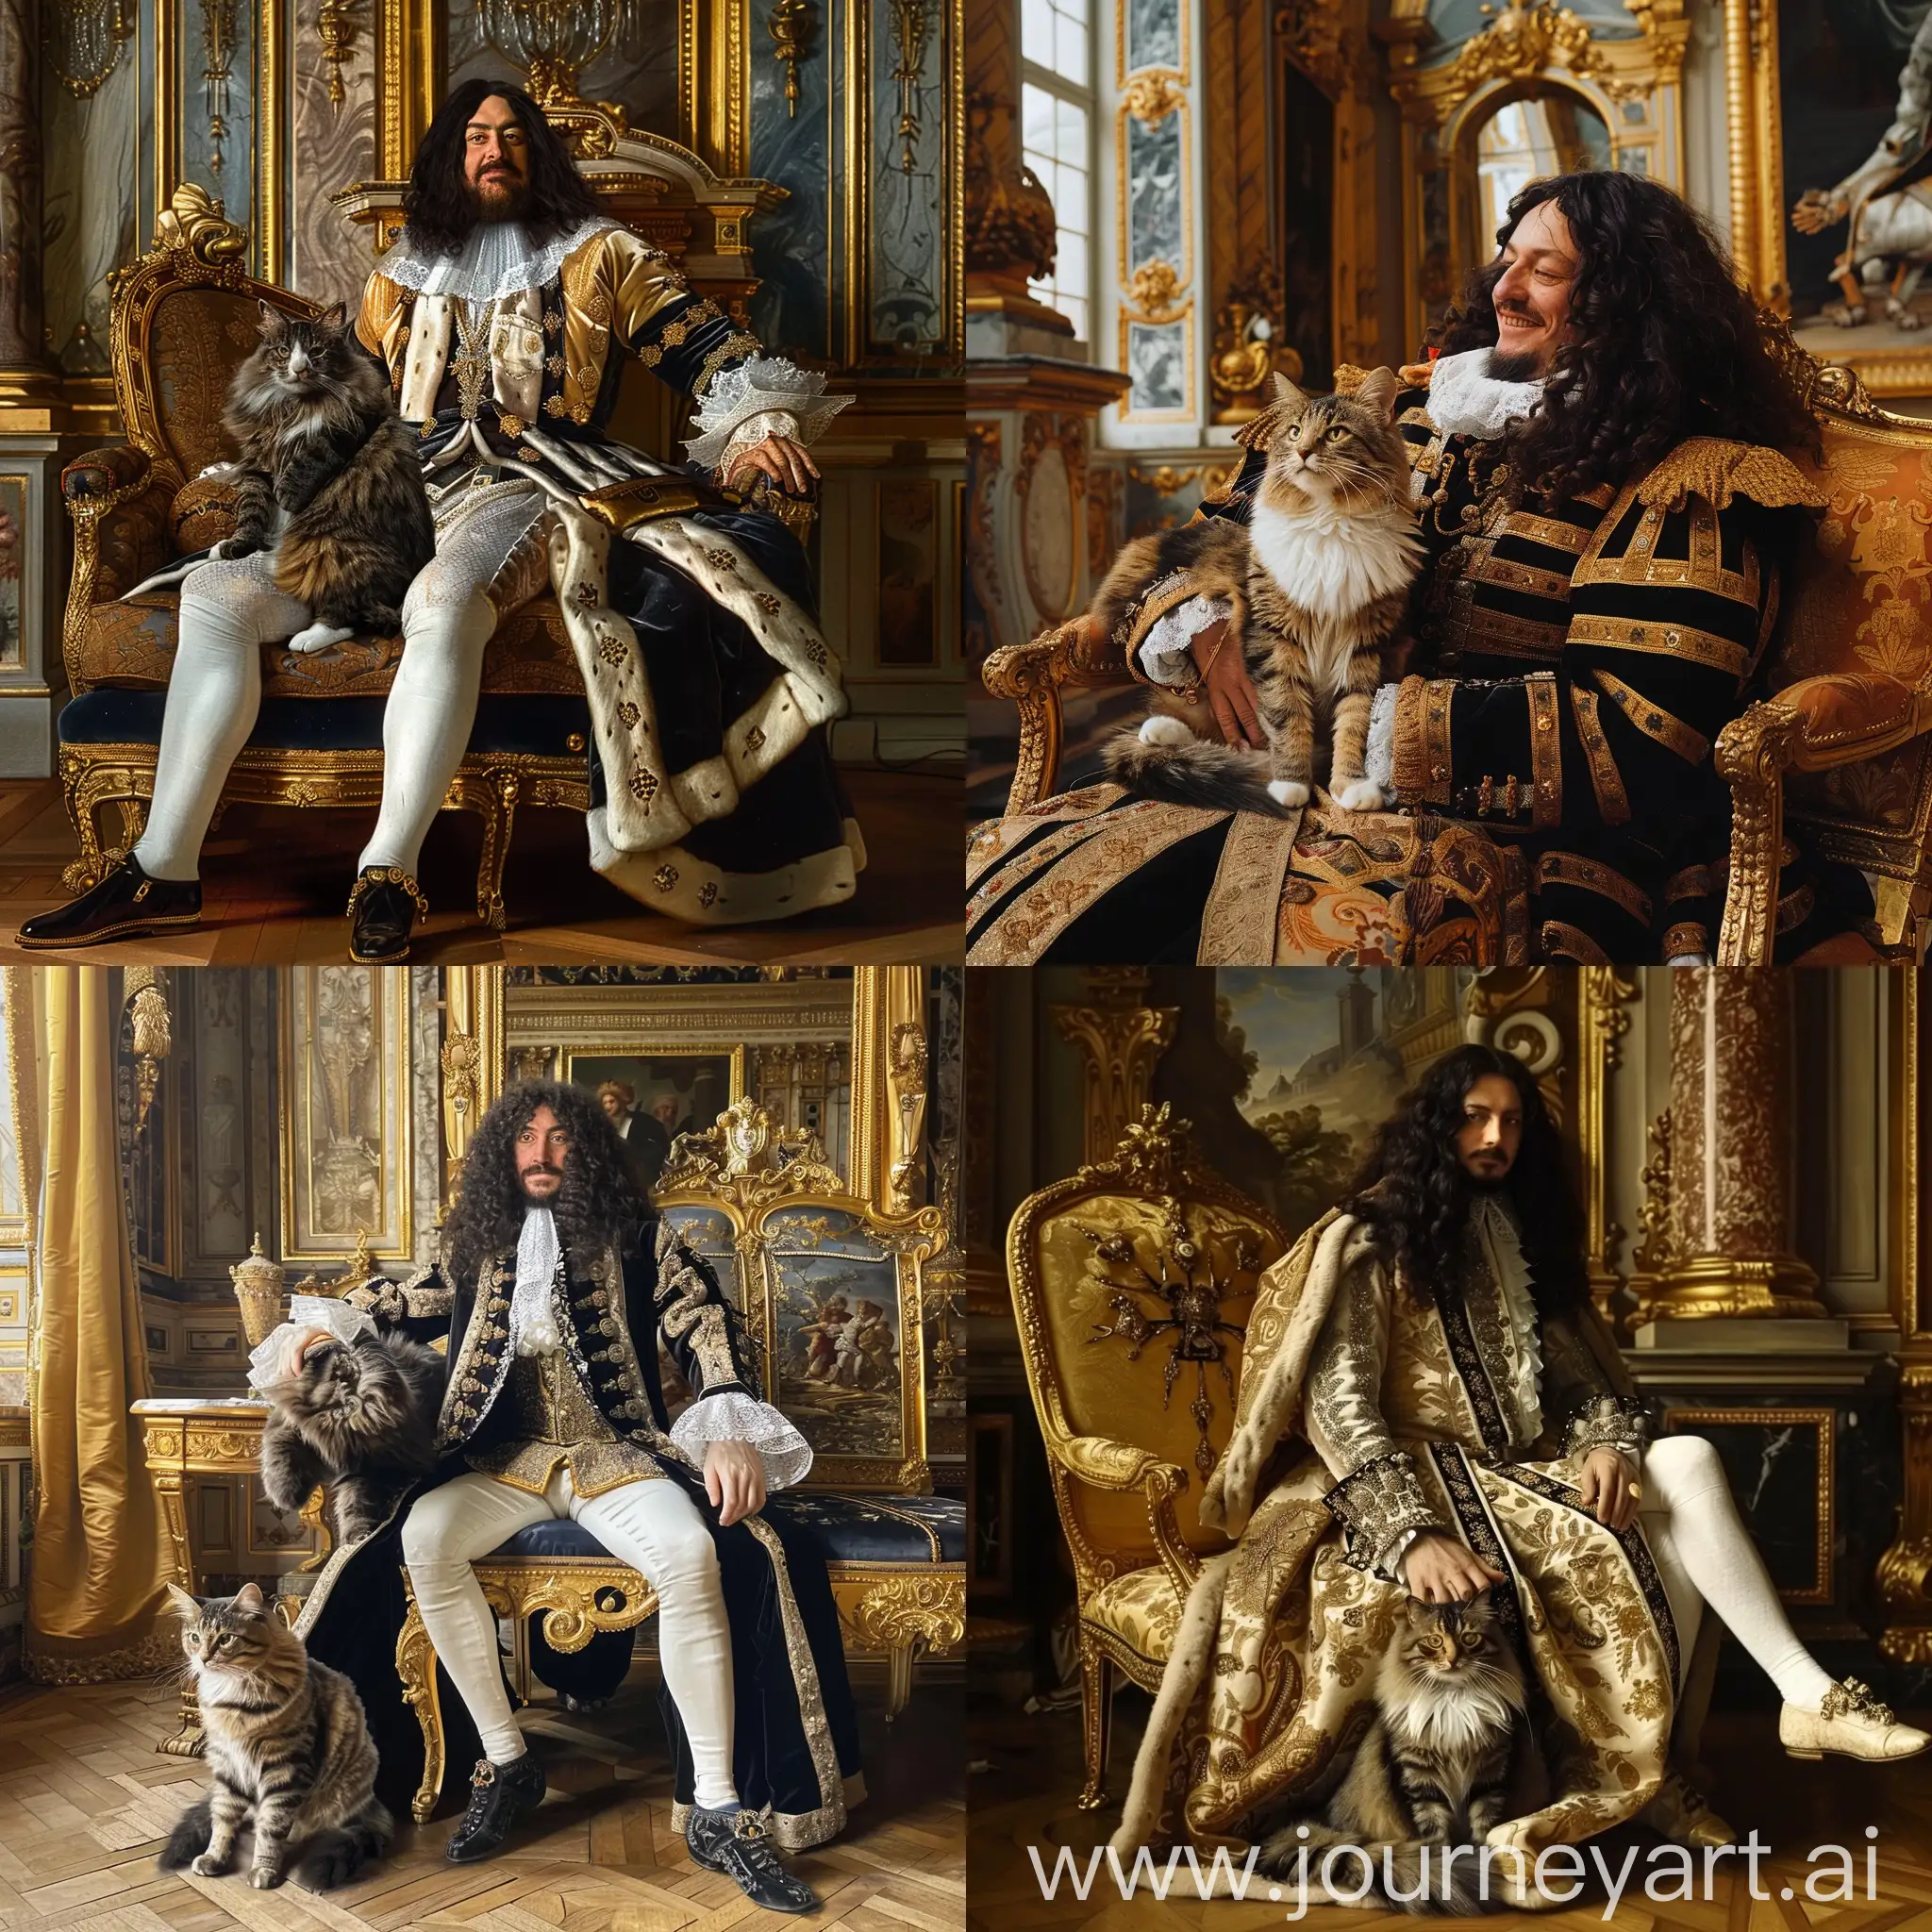 Create a photo of Sulkhan-Saba Orbeliani with Louis XIV visiting the Palace of Versailles in Paris. The palace should be decorated. A cat sits on Louis XIV's lap